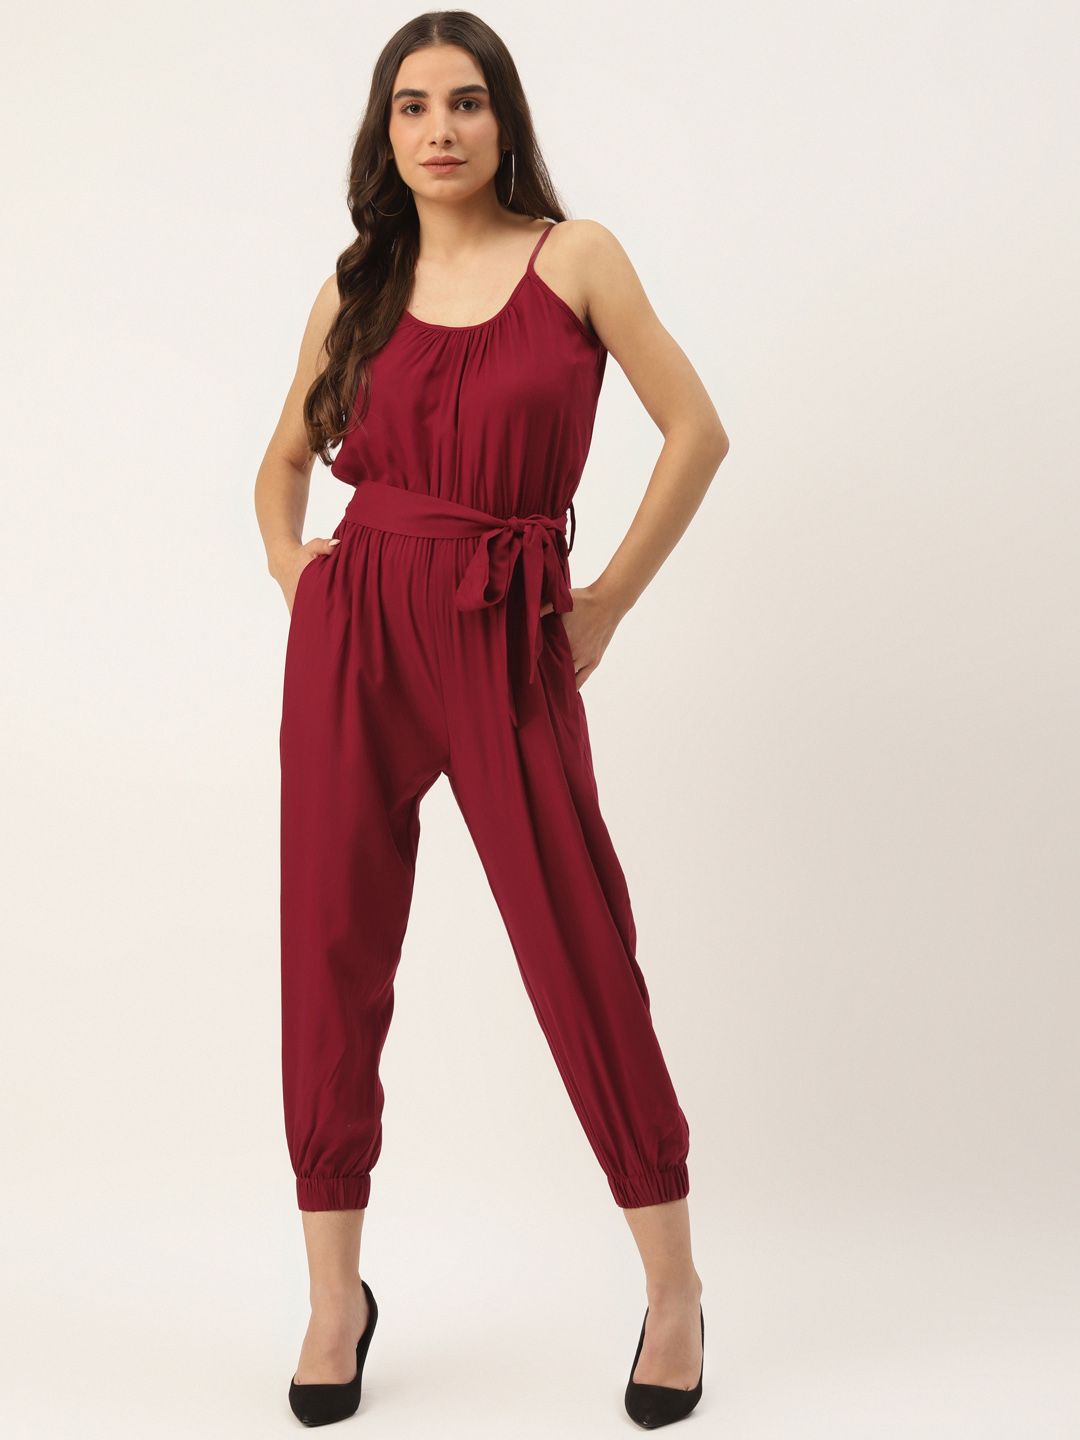 BRINNS Women Maroon Solid Basic Cropped Jumpsuit with Tie-Up Detail Price in India